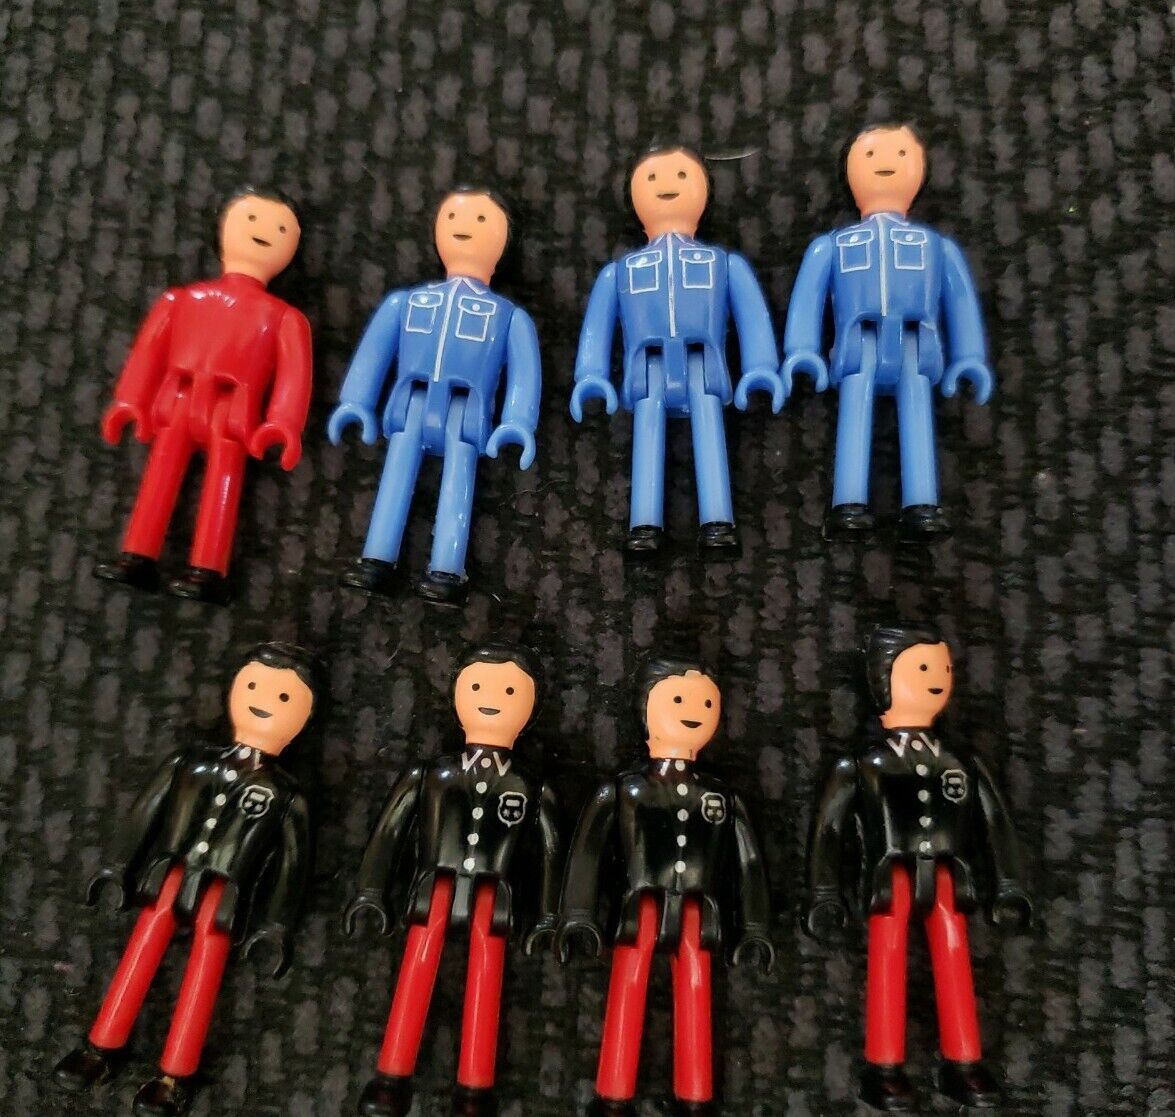 8 RARE HTF VINTAGE COLLECTABLE ACC At the price of surprise Cheap bargain and FIGURES MAJOKIT MAJORETTE